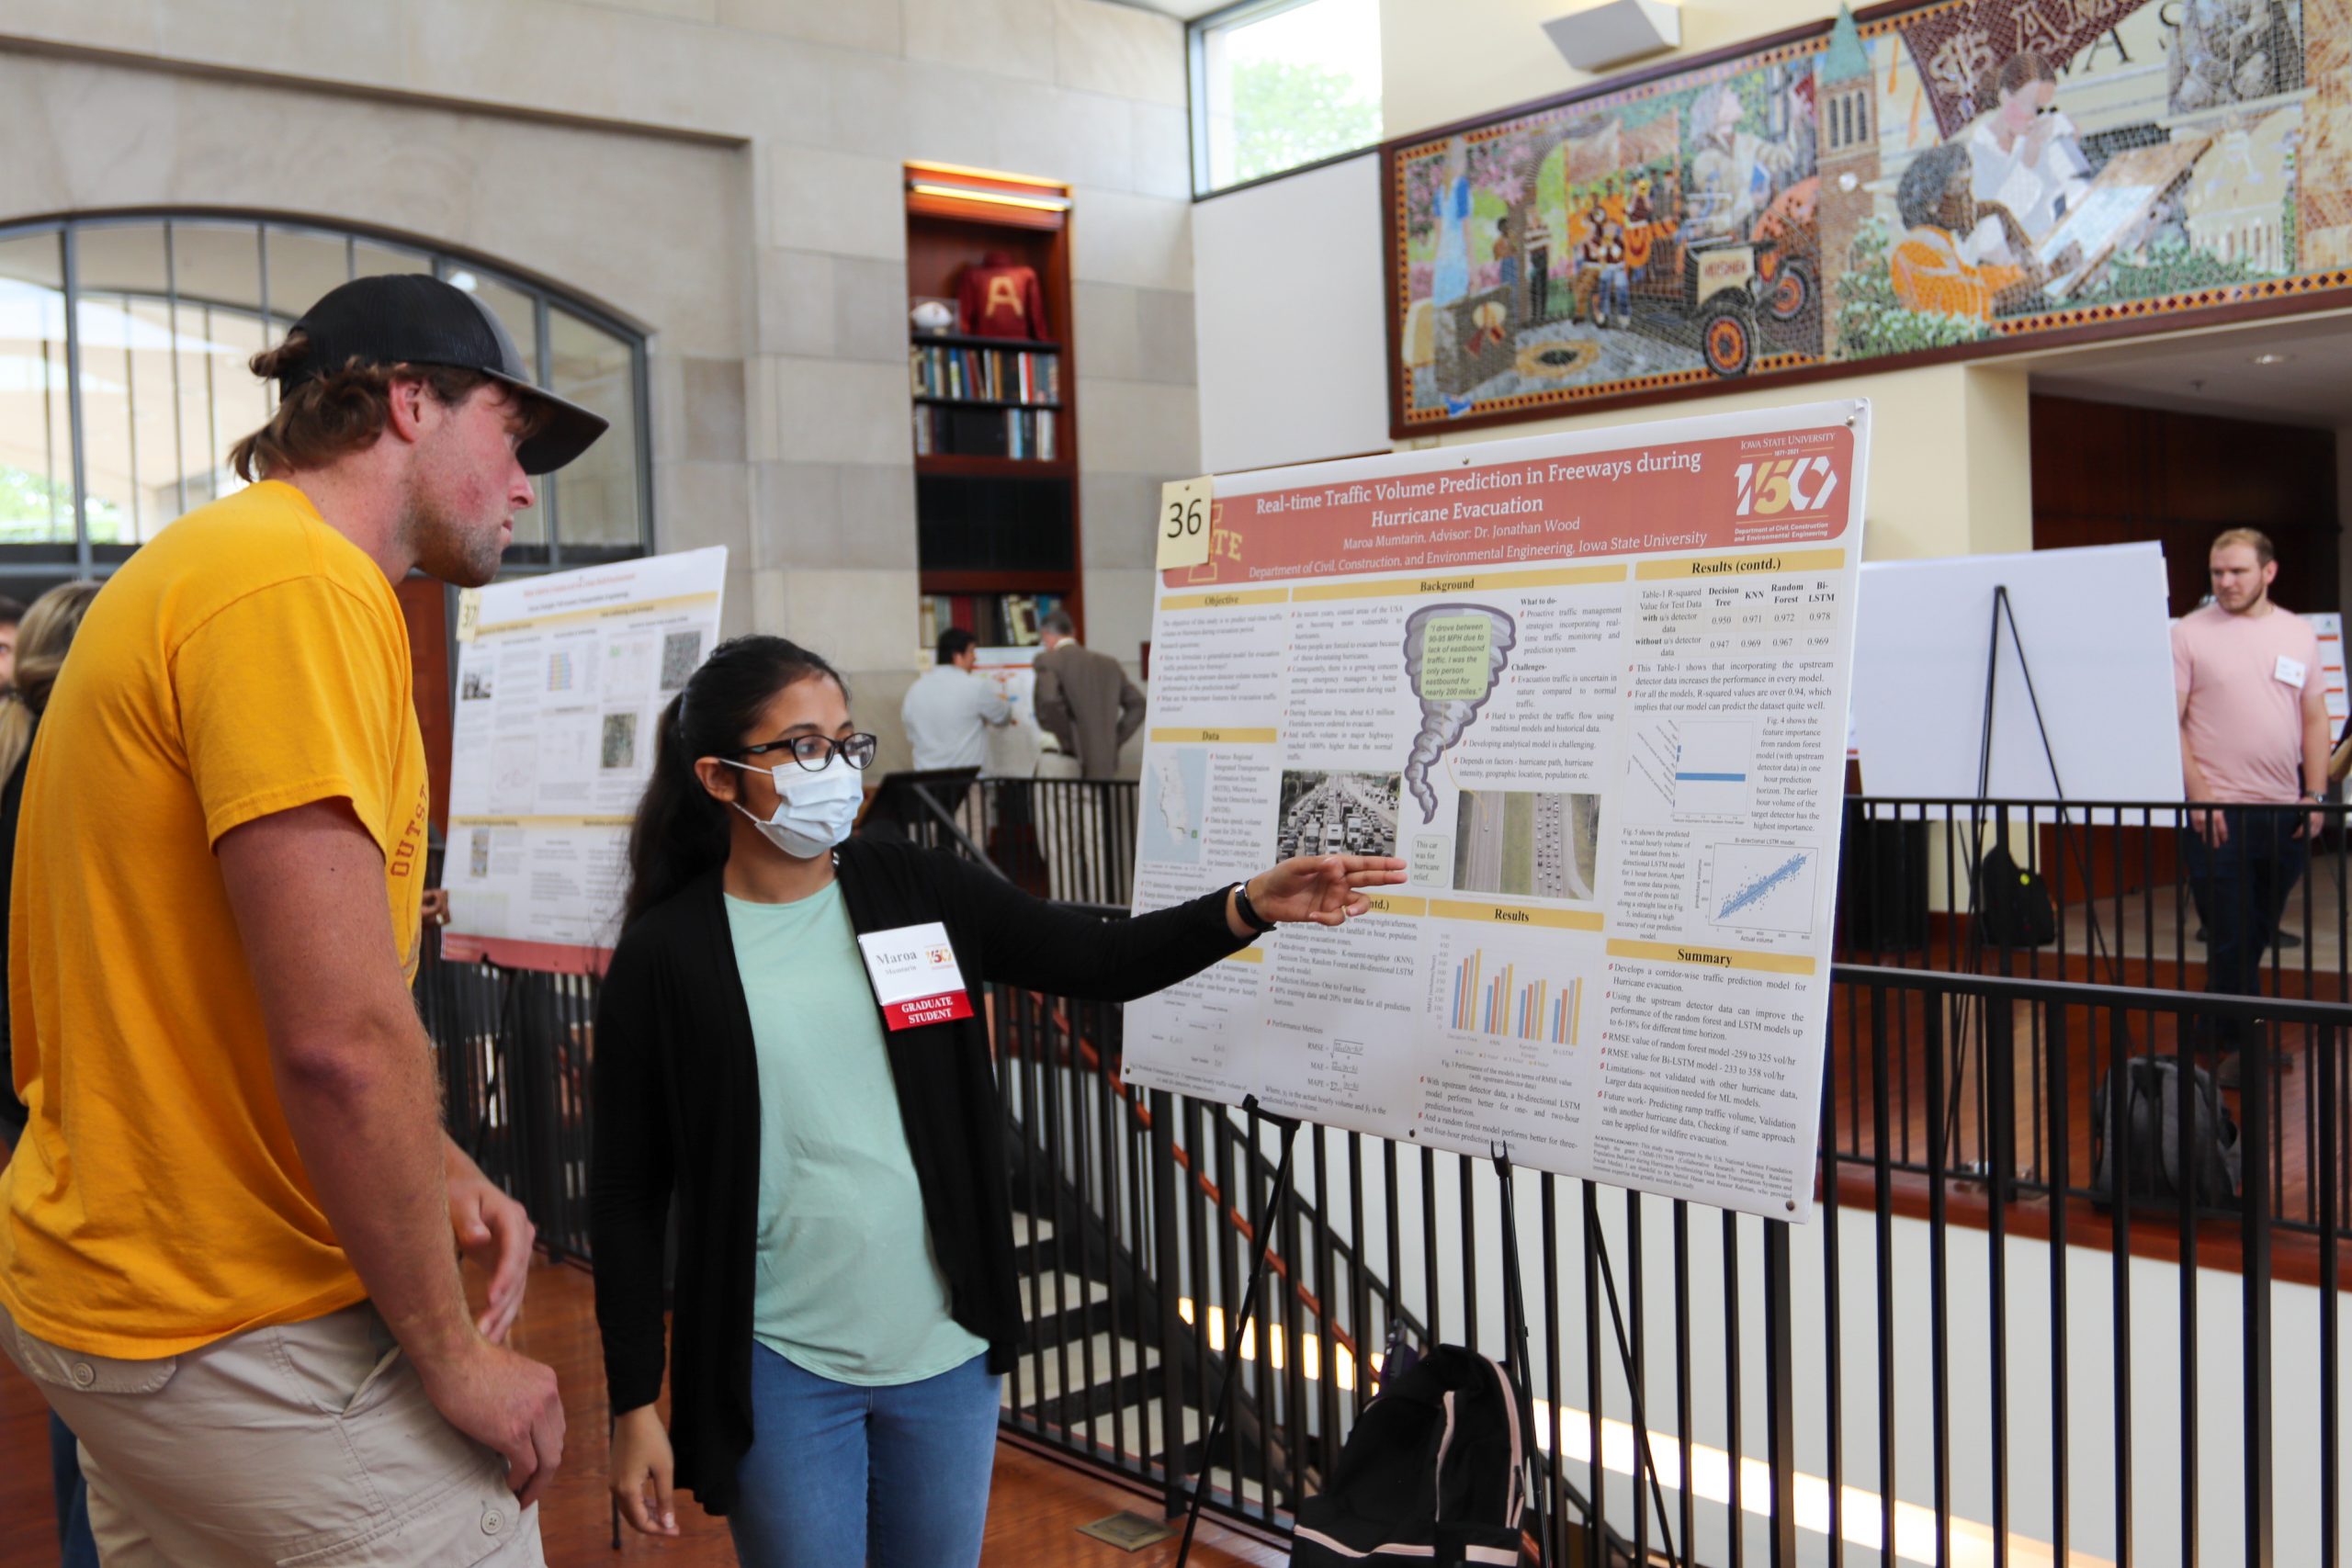 Two attendees of the research symposium discuss real-time traffic volume prediction.